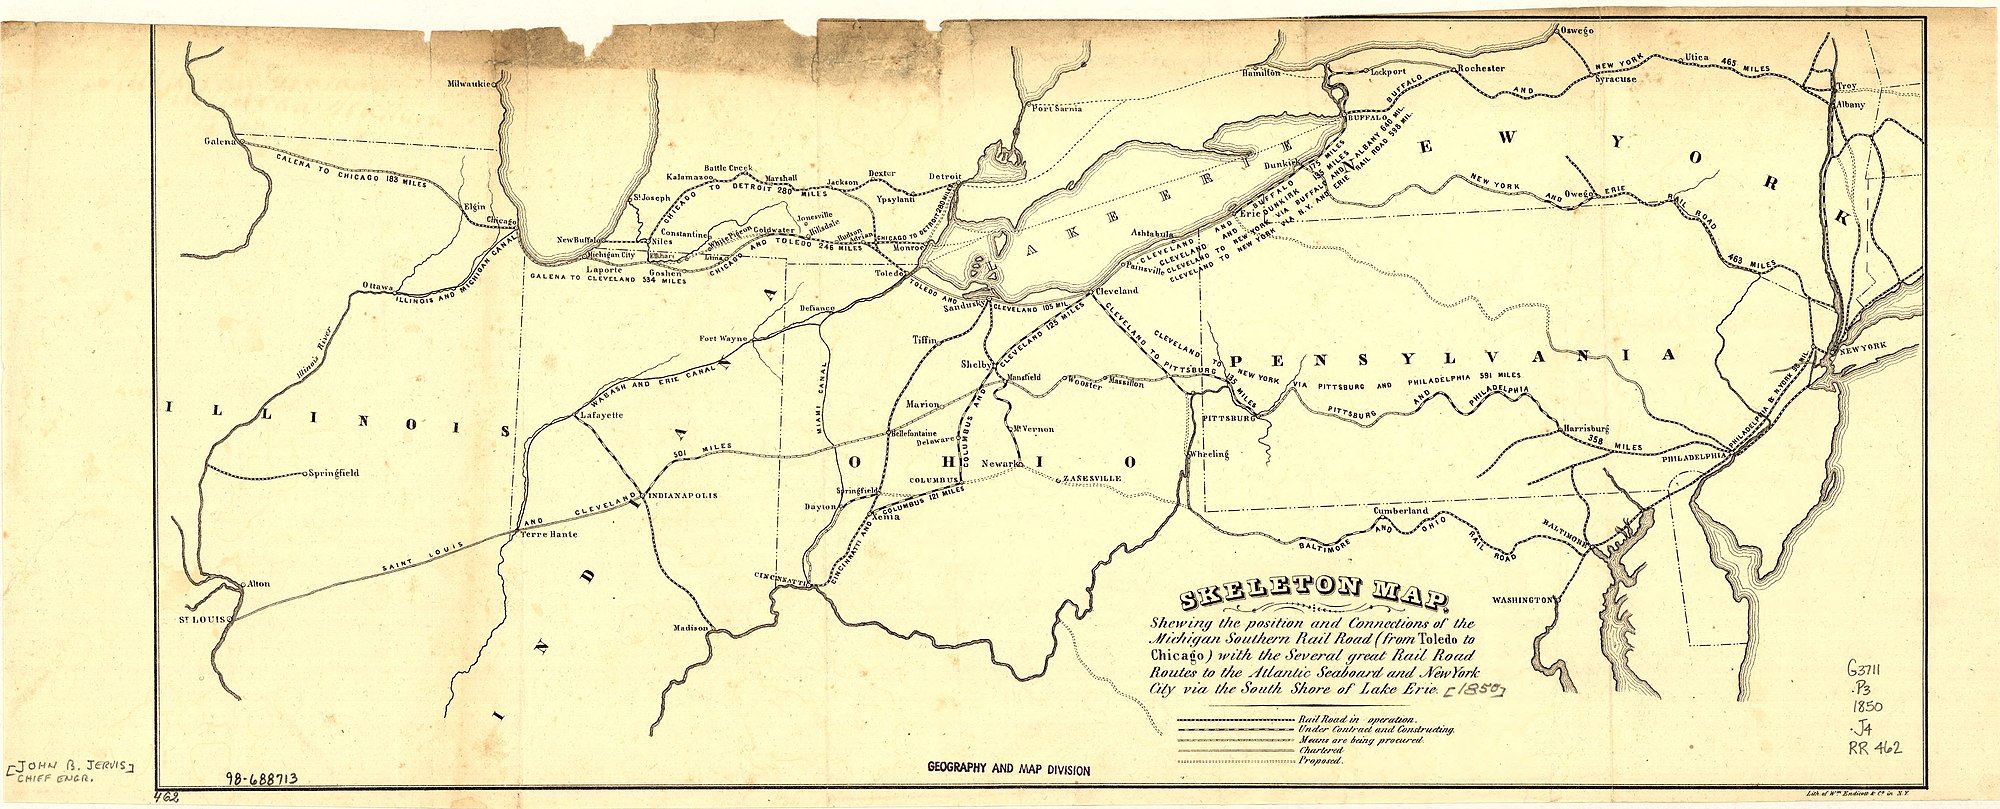 In this 1850 map, the original Wabash and Erie Canal is shown as part of an emerging system of canals and rail lines